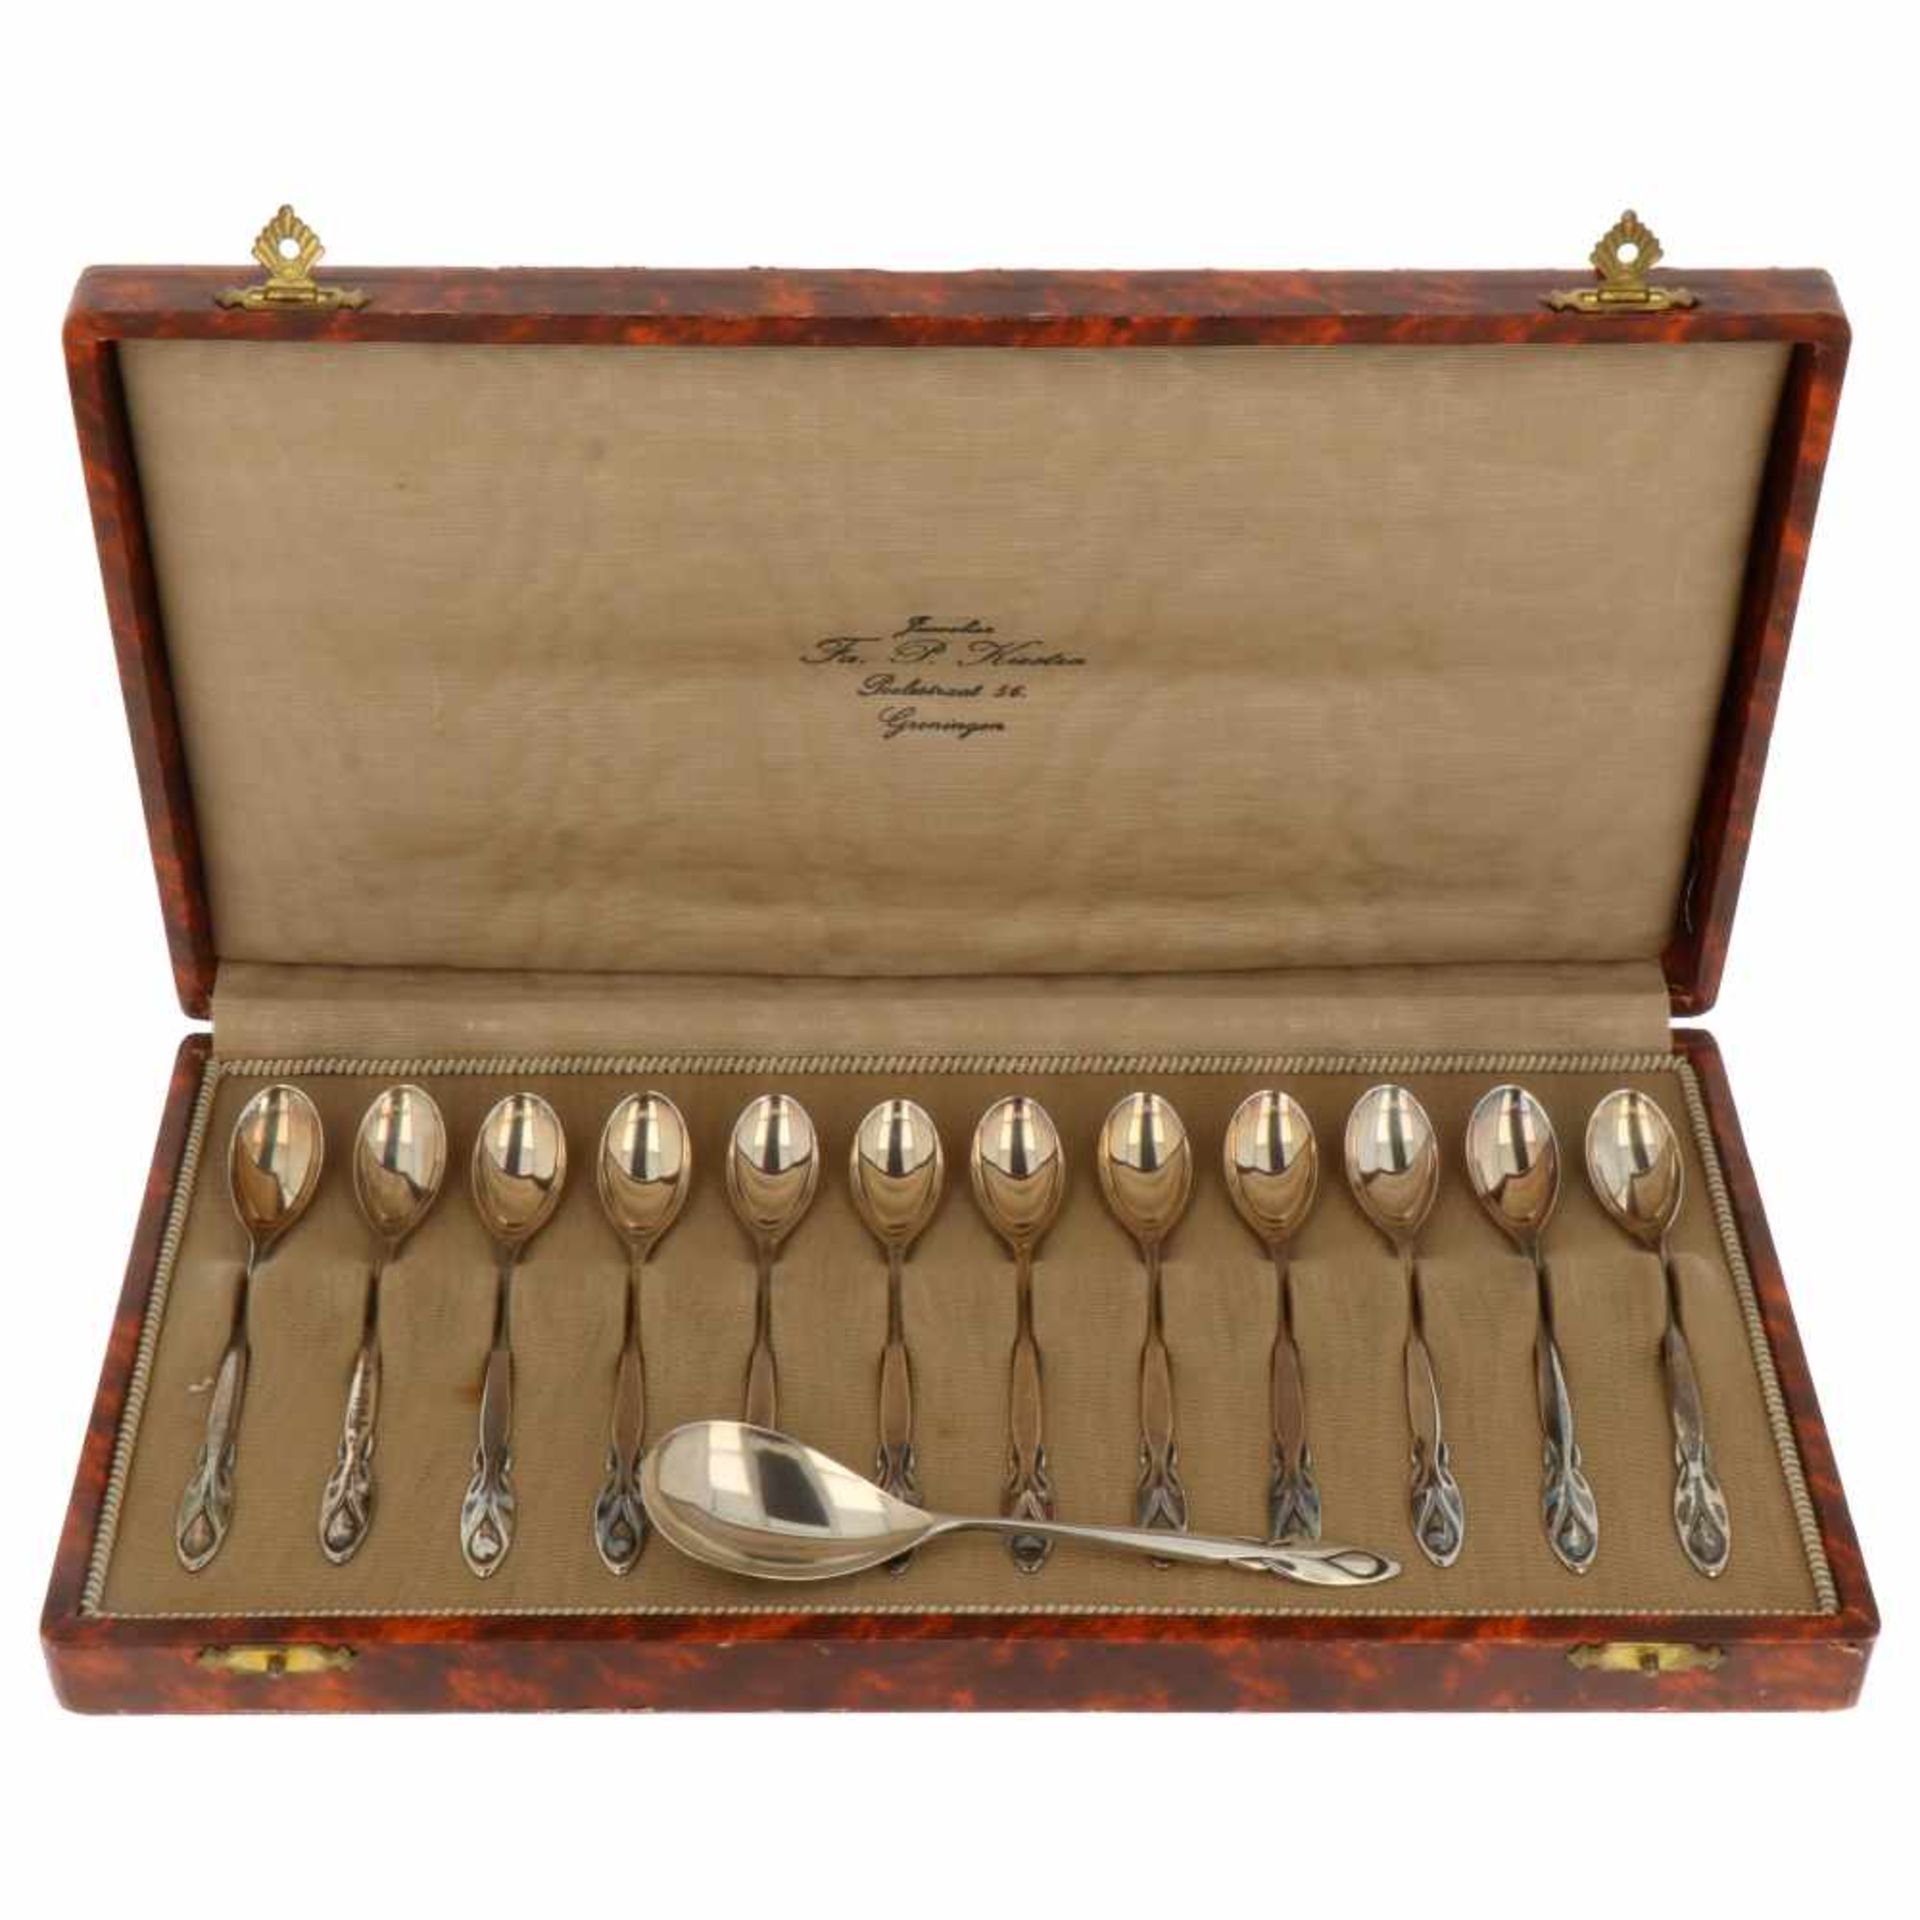 (13) Piece set of silver teaspoons with sugar scoop, decorated in 'Jugendstil'-style.